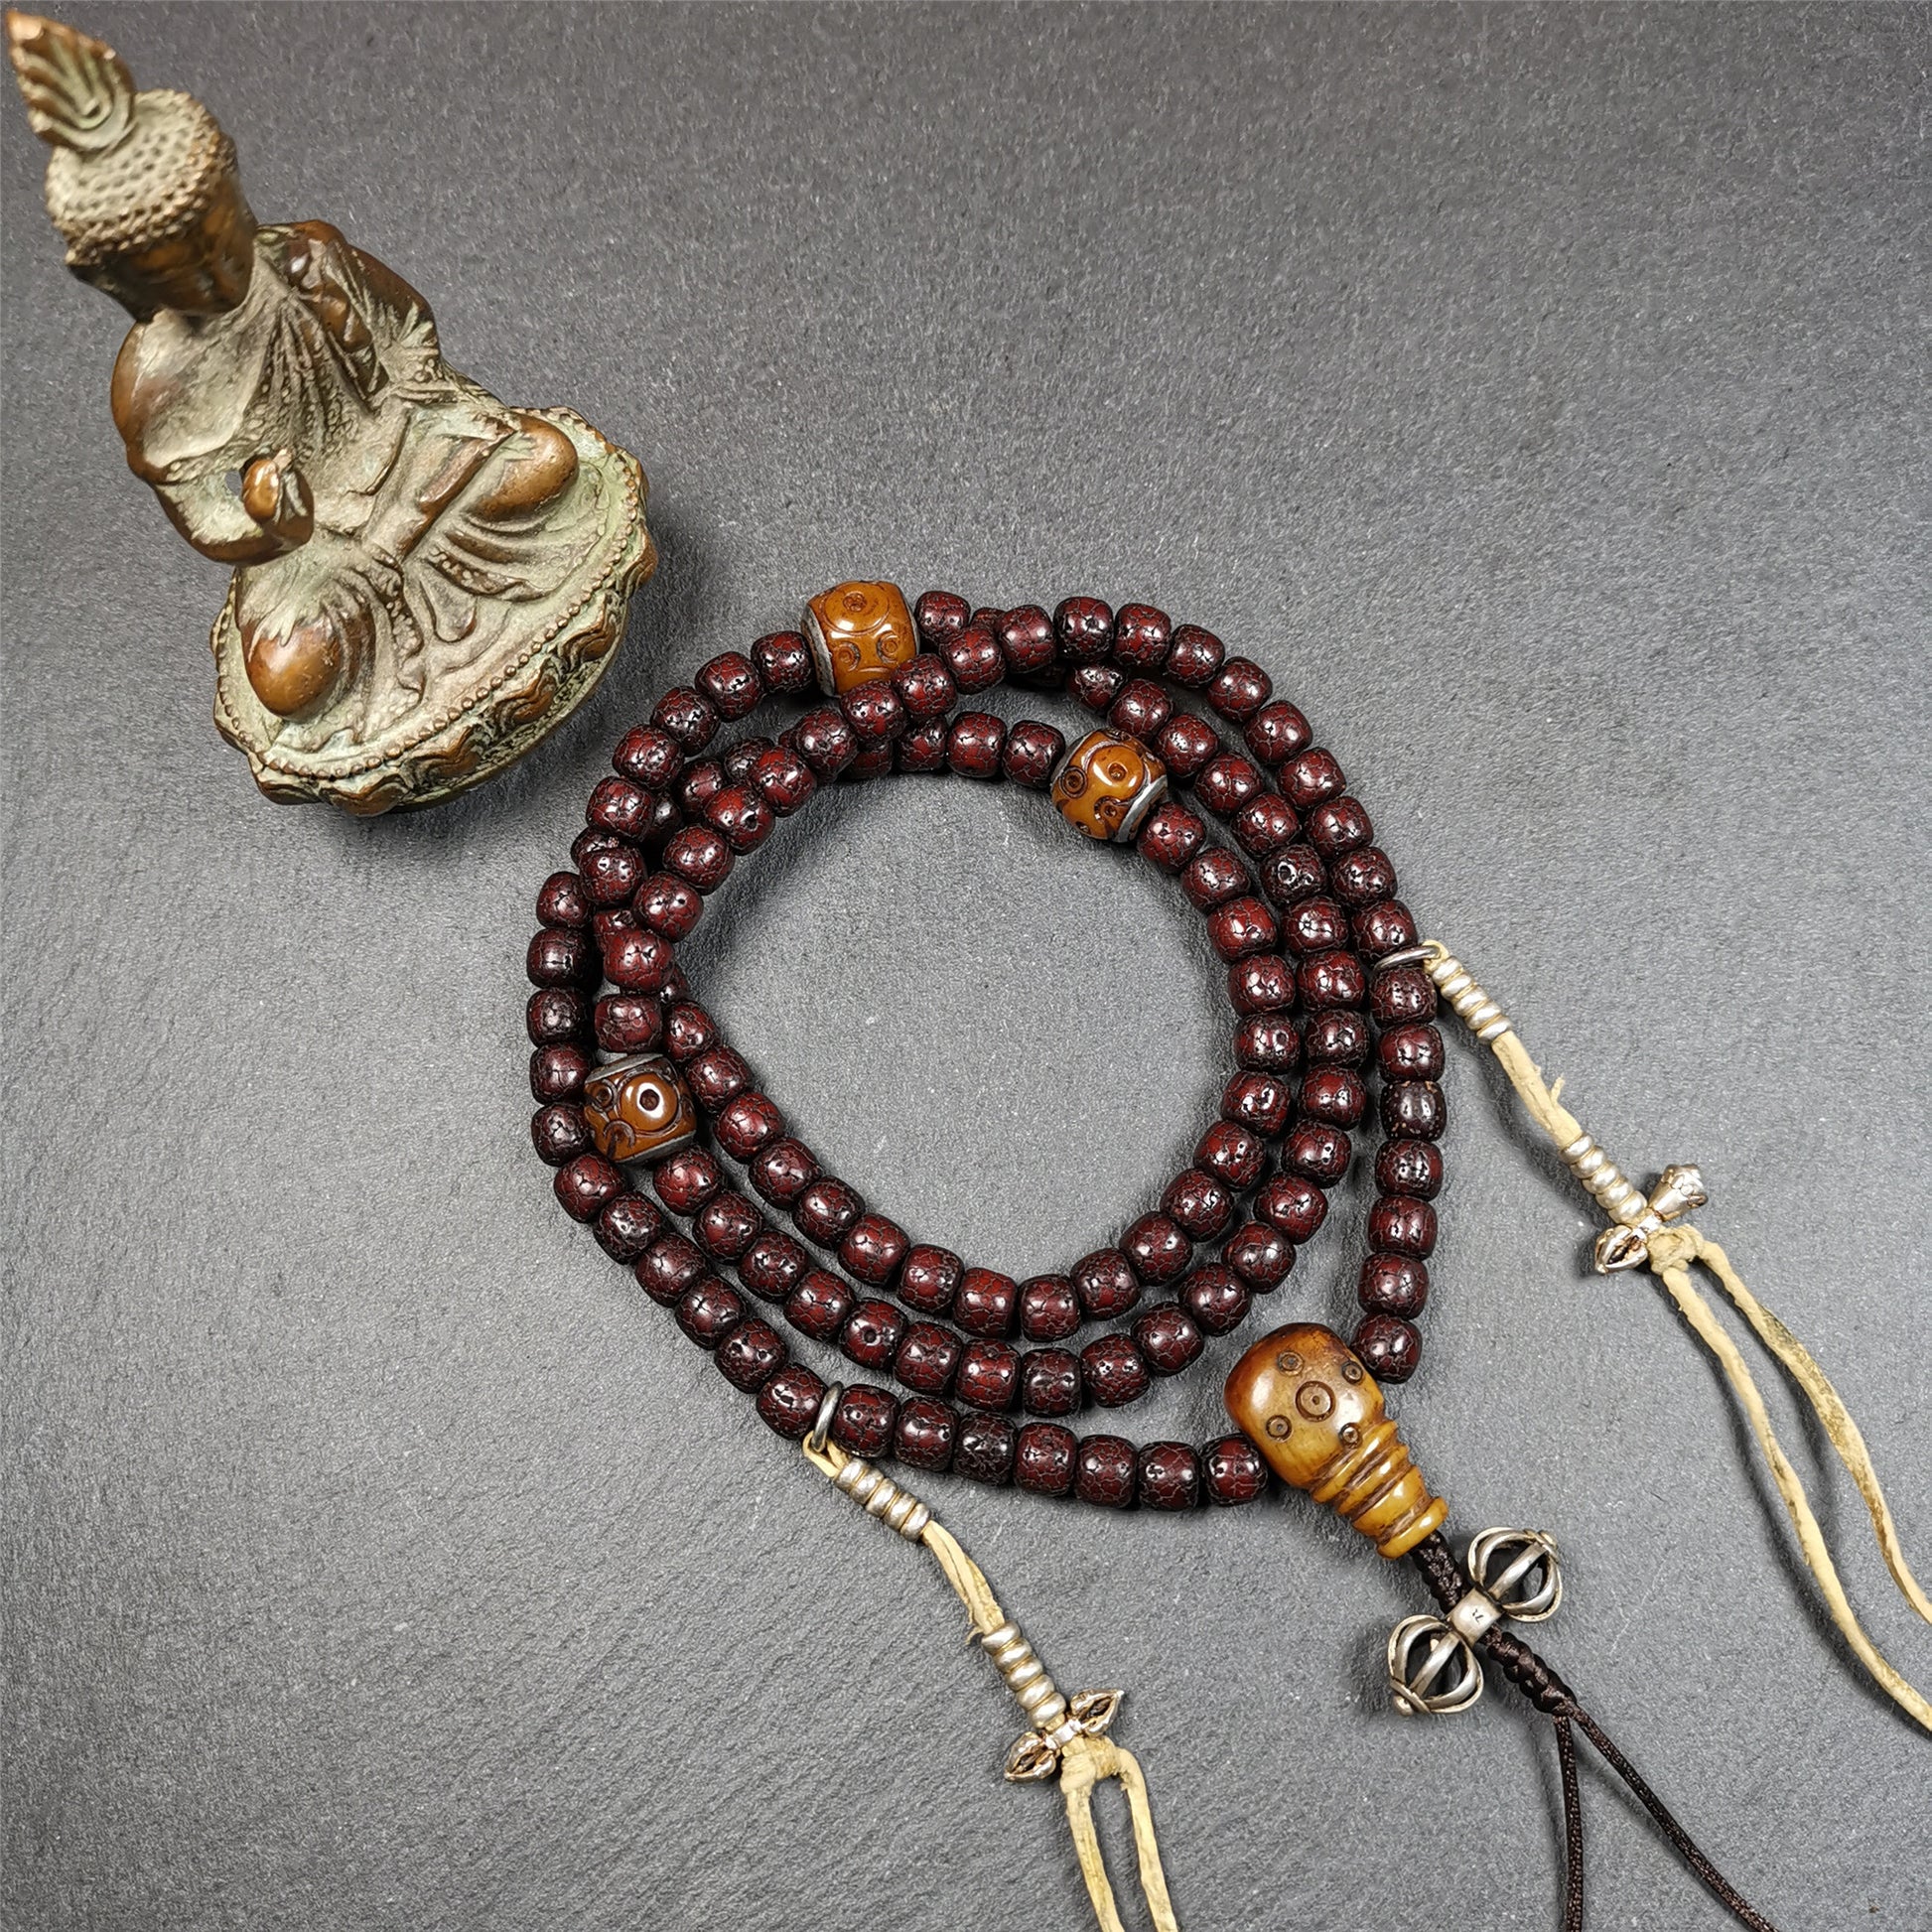 This mala is made by Tibetan craftsmen and come from Hepo Town, Baiyu County,Tibet, the birthplace of the famous Tibetan handicrafts,about 30 years old,blessed by a lama in Baiyu Monastery. It's composed of 108 pcs 8mm lotus seed beads,then add some old bone beads,1 pair of silver bead counters,and silver guru bead,vajra pandent 